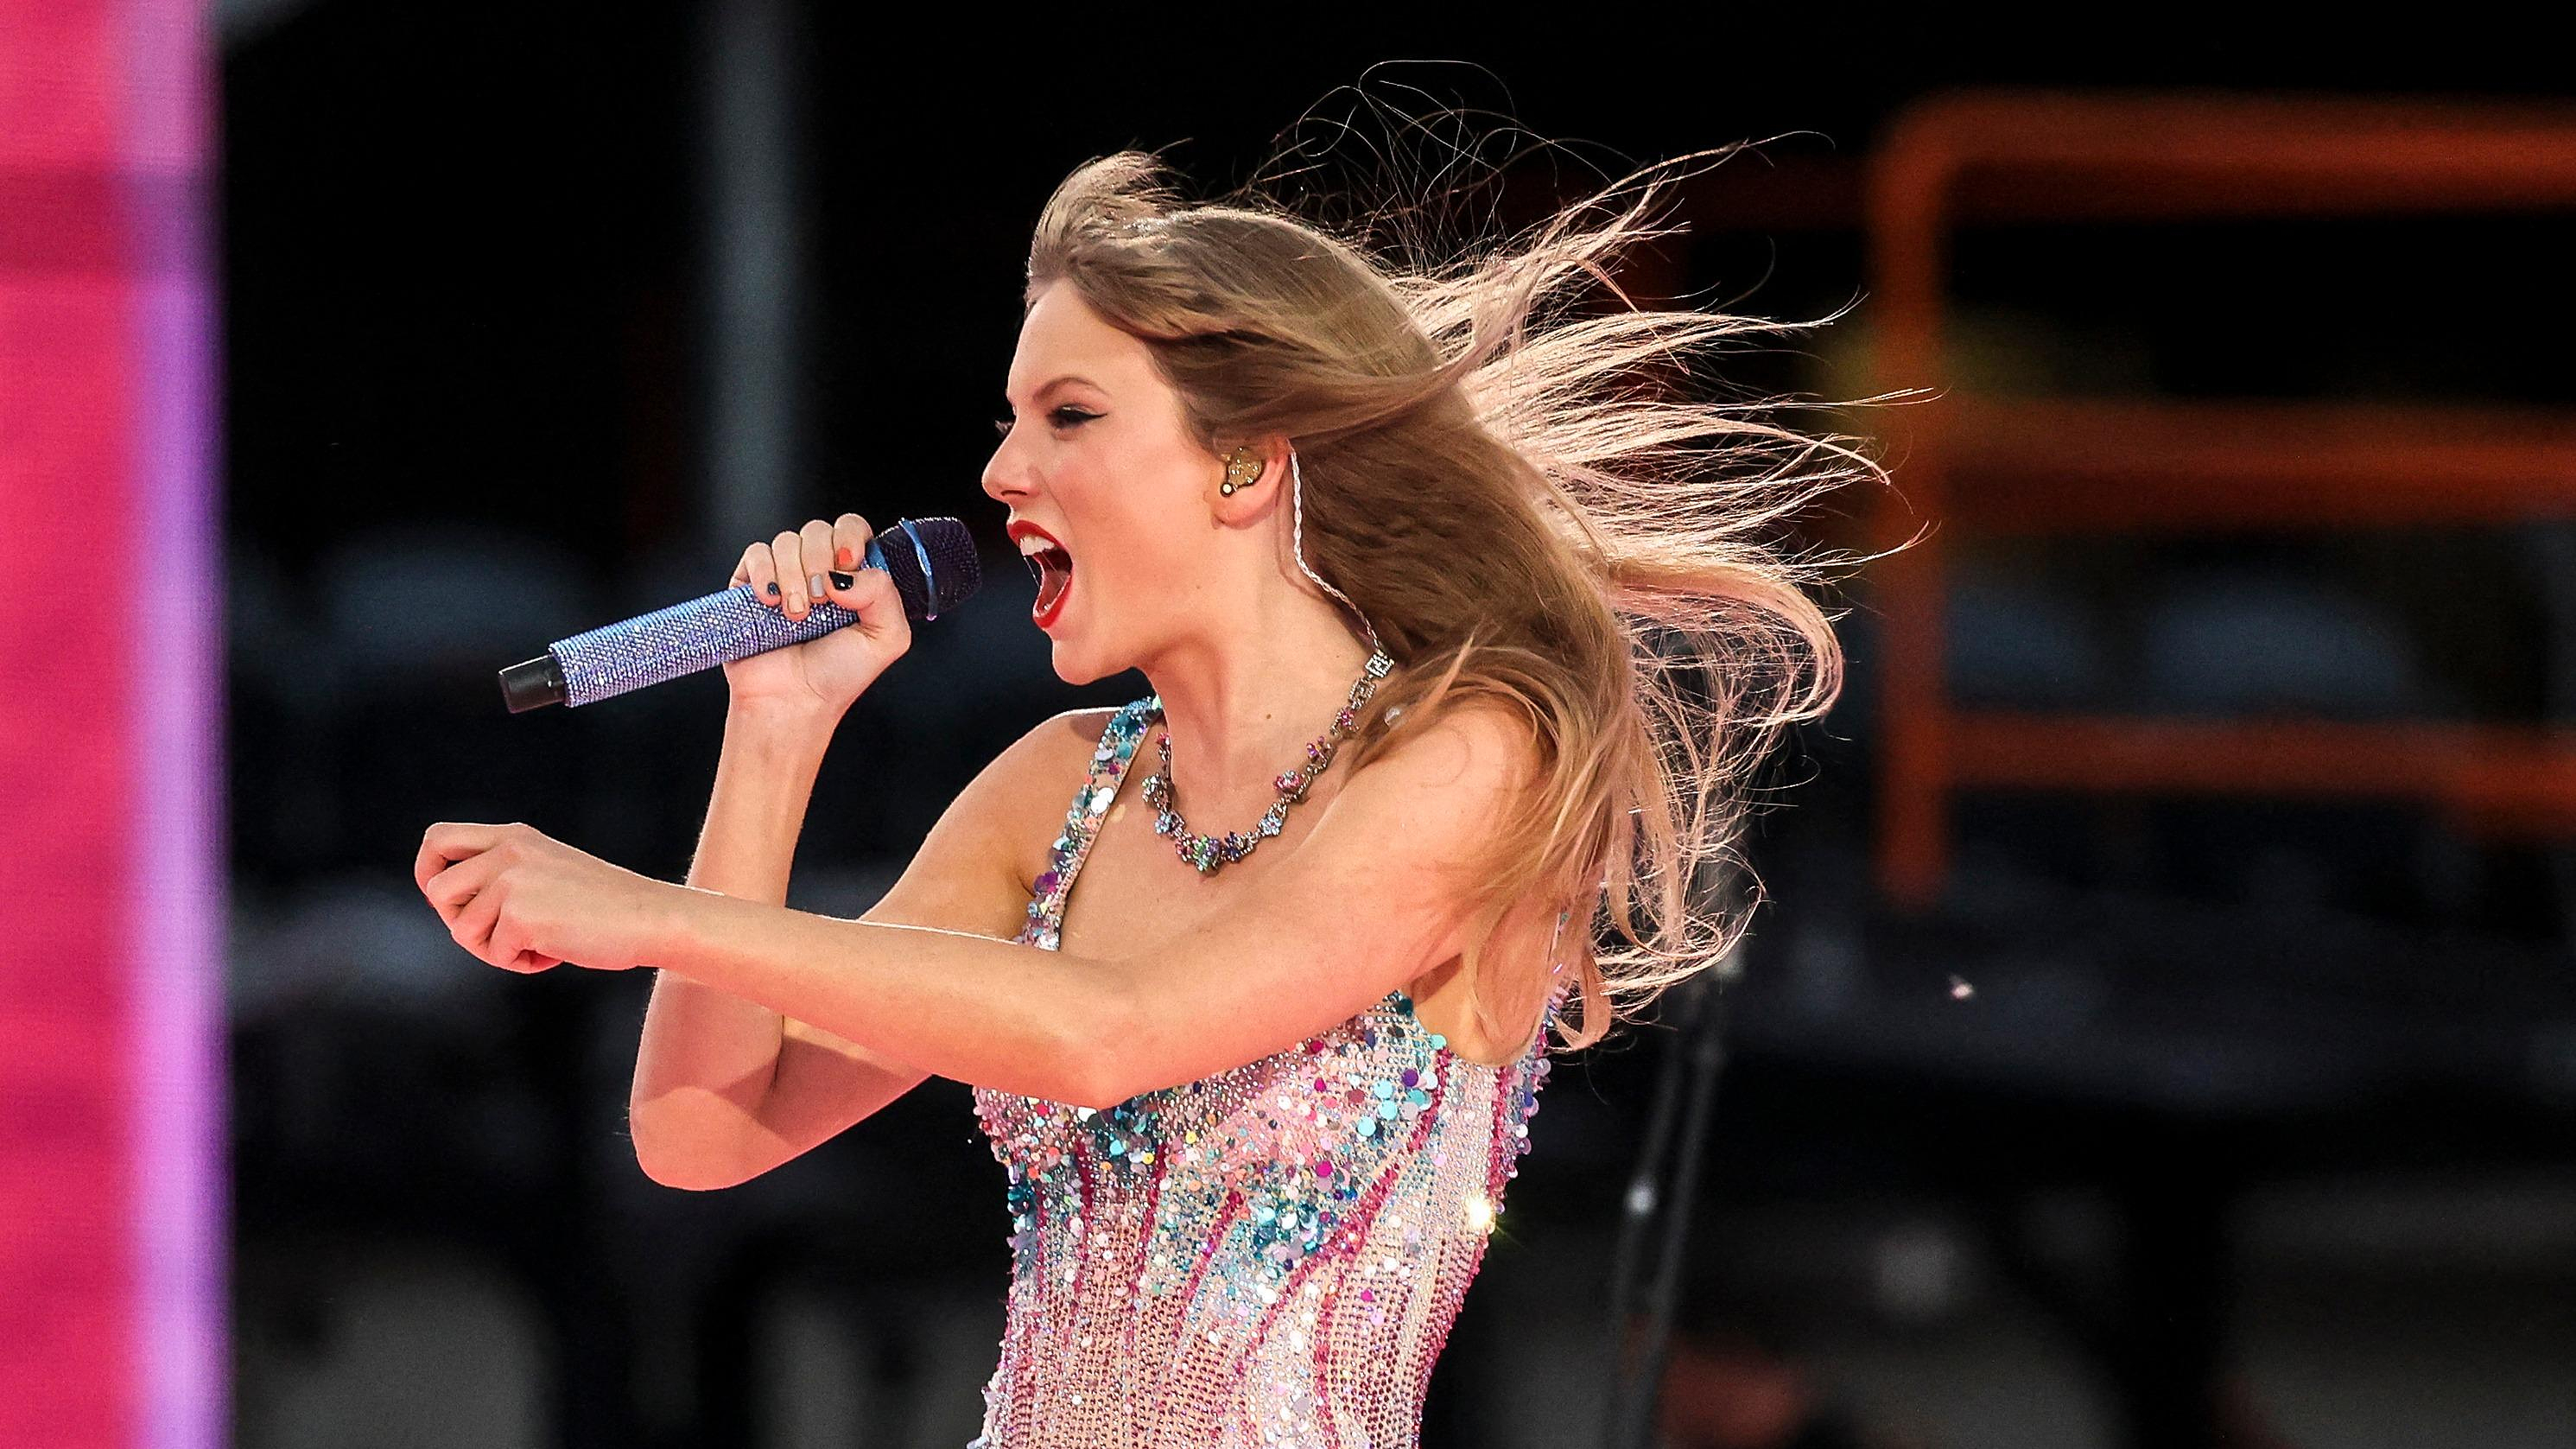 American justice relies on Taylor Swift to dismiss Metallica